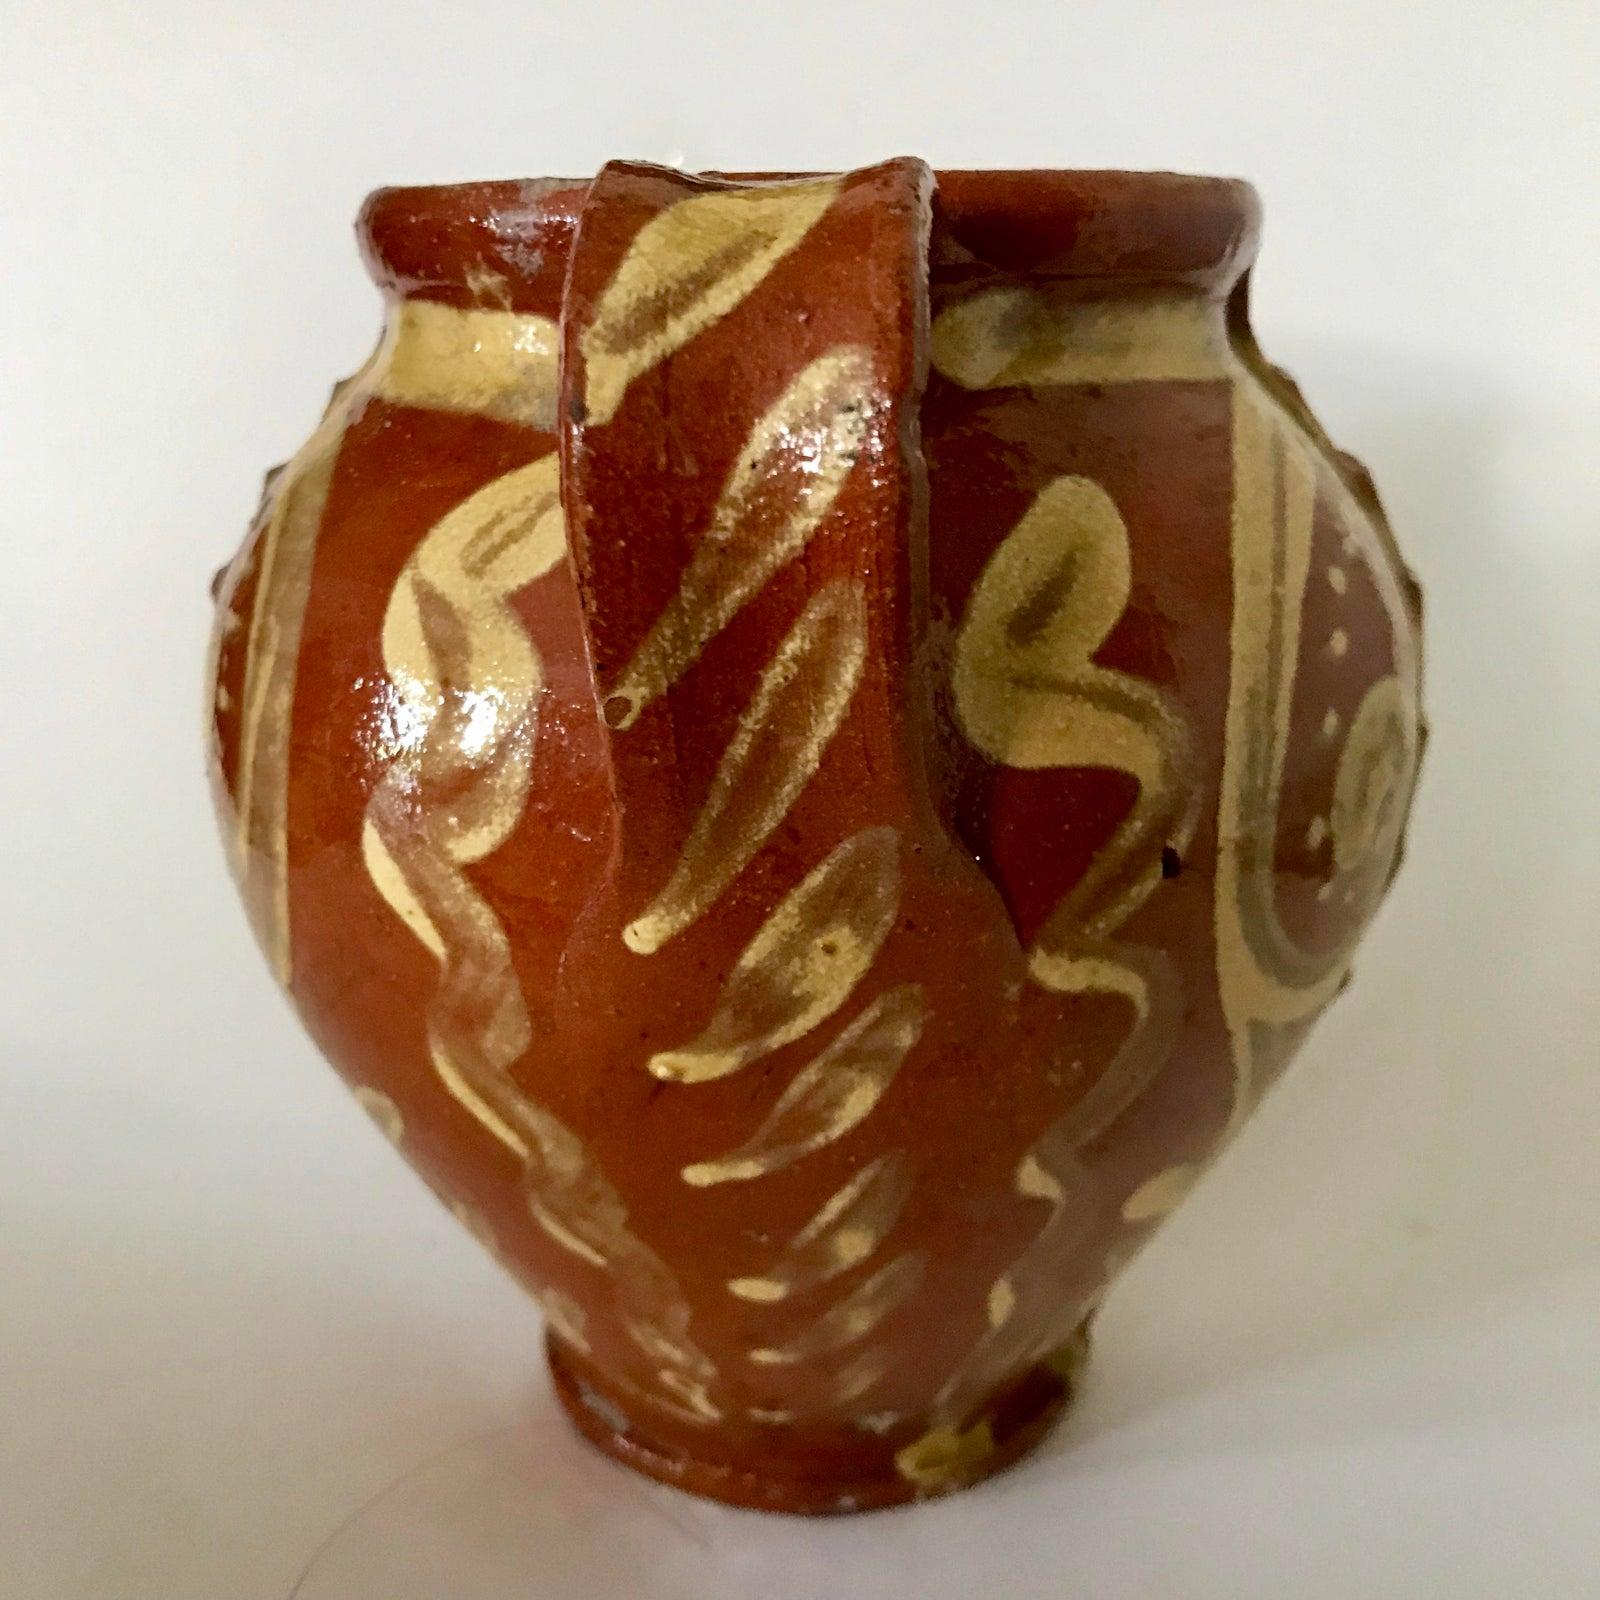 Vintage Italian slipware terra cotta vase with handles. Stamped on bottom ‘Made in Italy’.